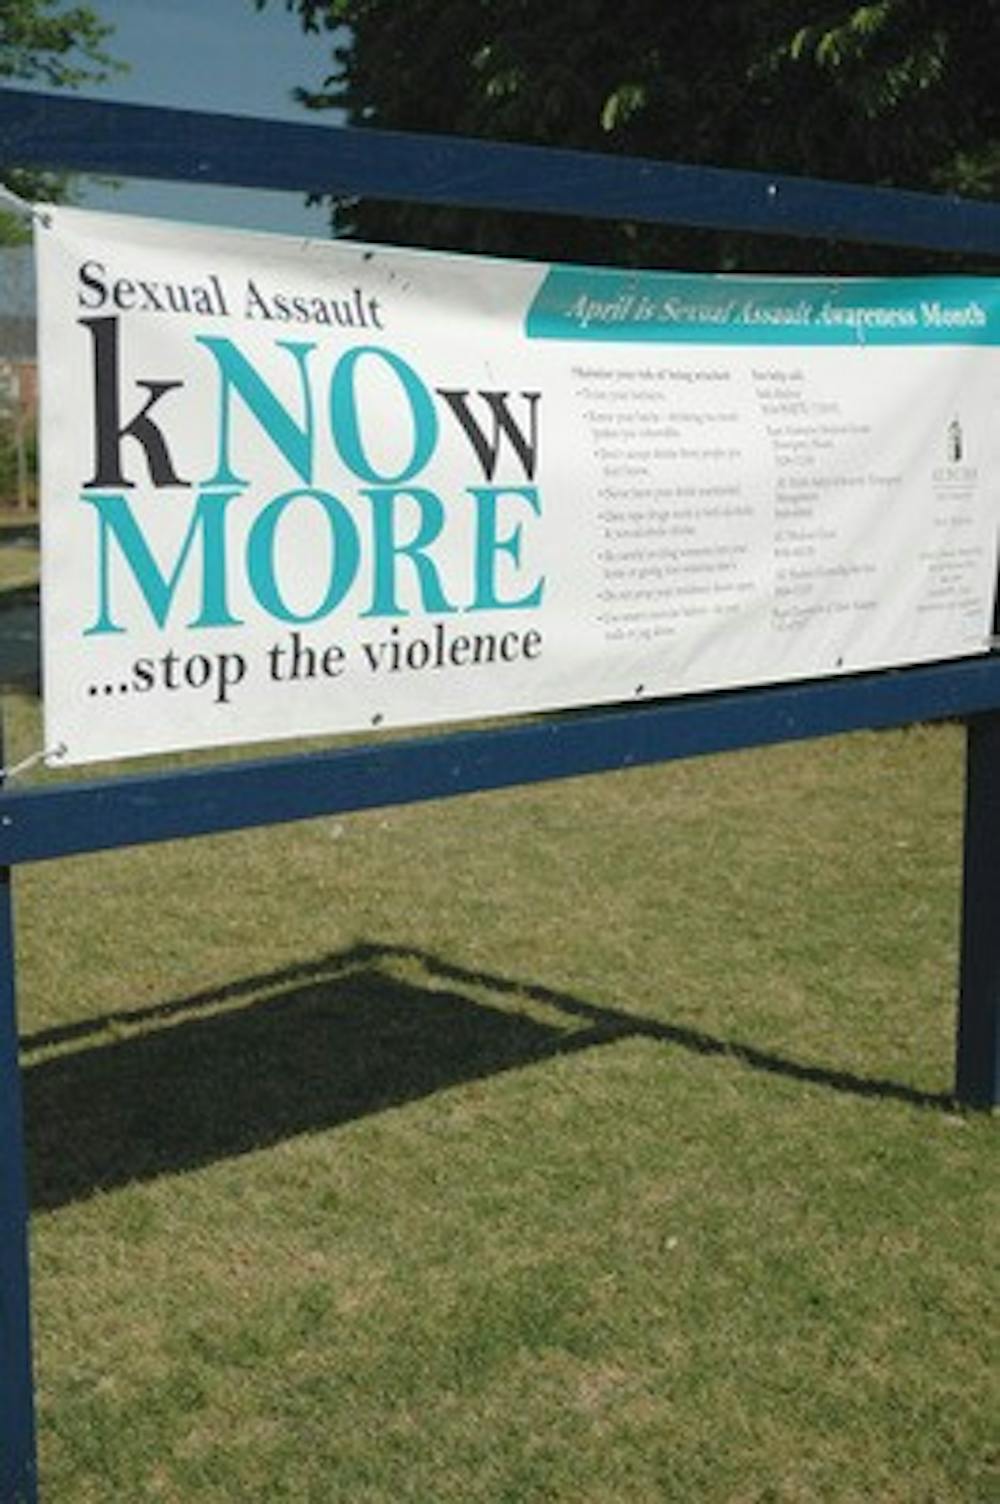 JD Schein / PHOTO EDITOR



April has been declared Sexual Assault Awareness Month. One in four college-age women will be a victim of sexual assault while in college. Auburn University's Safe Harbor and the Women's Resource center have hosted several events to raise awareness.